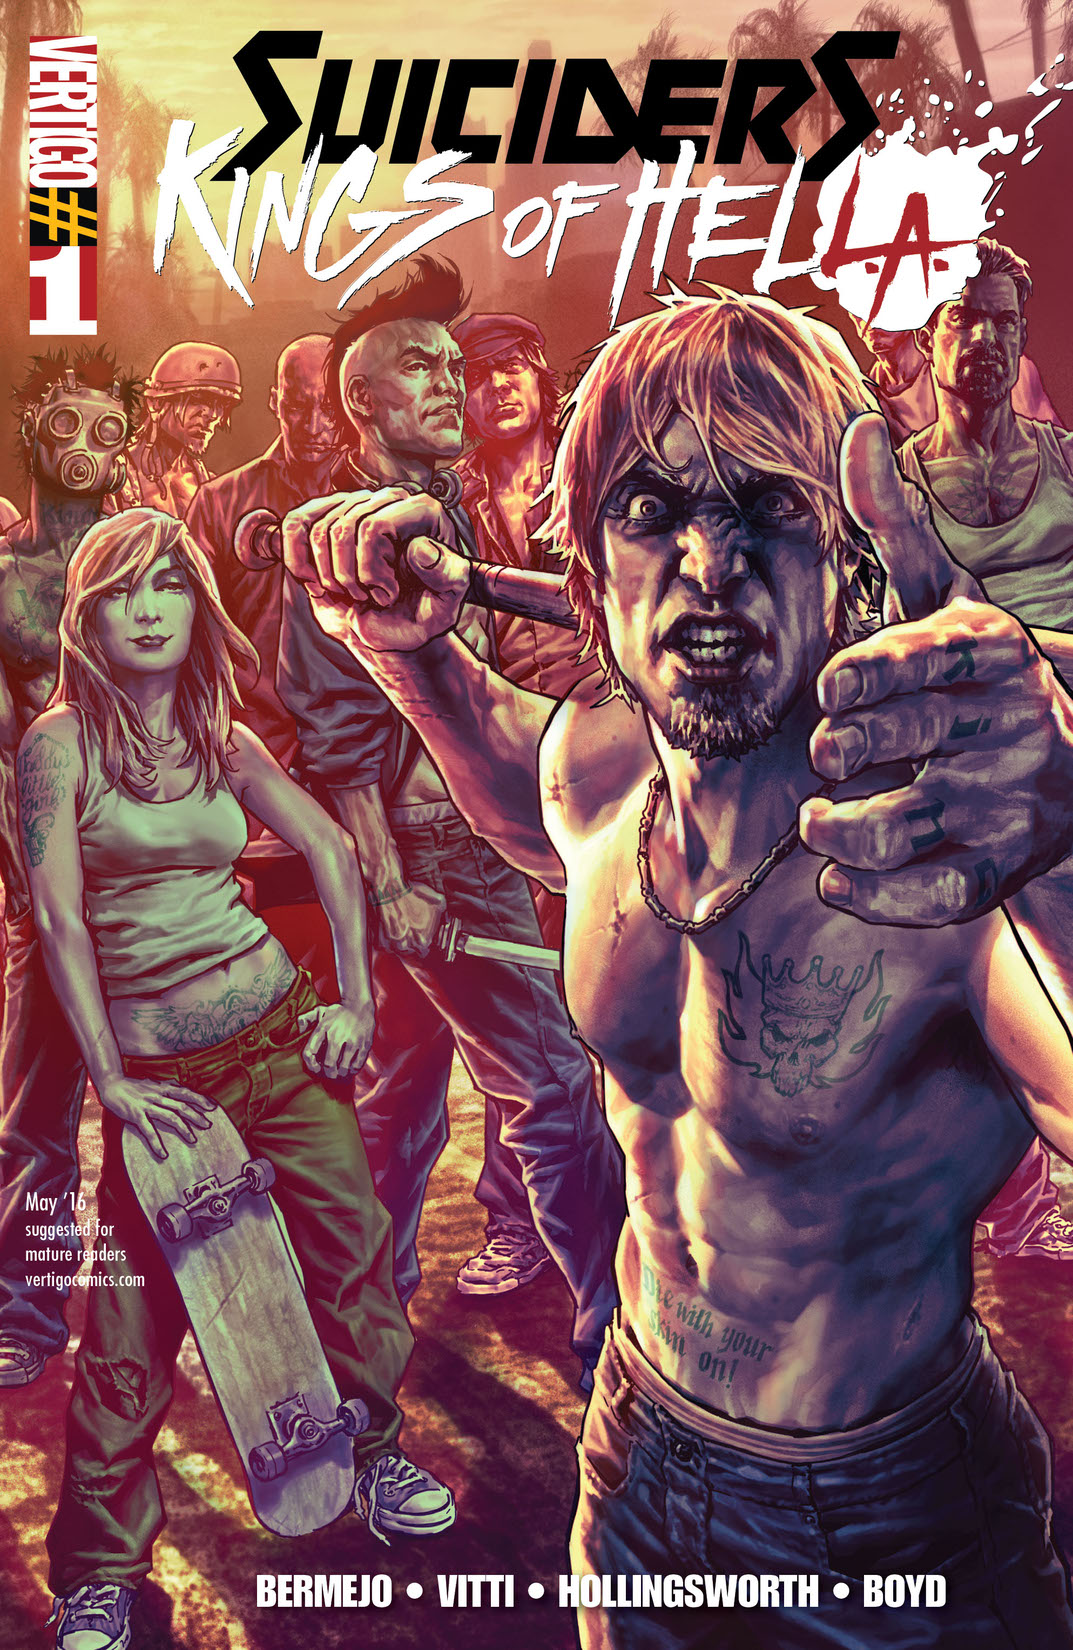 Suiciders: Kings of HelL.A. #1 preview images